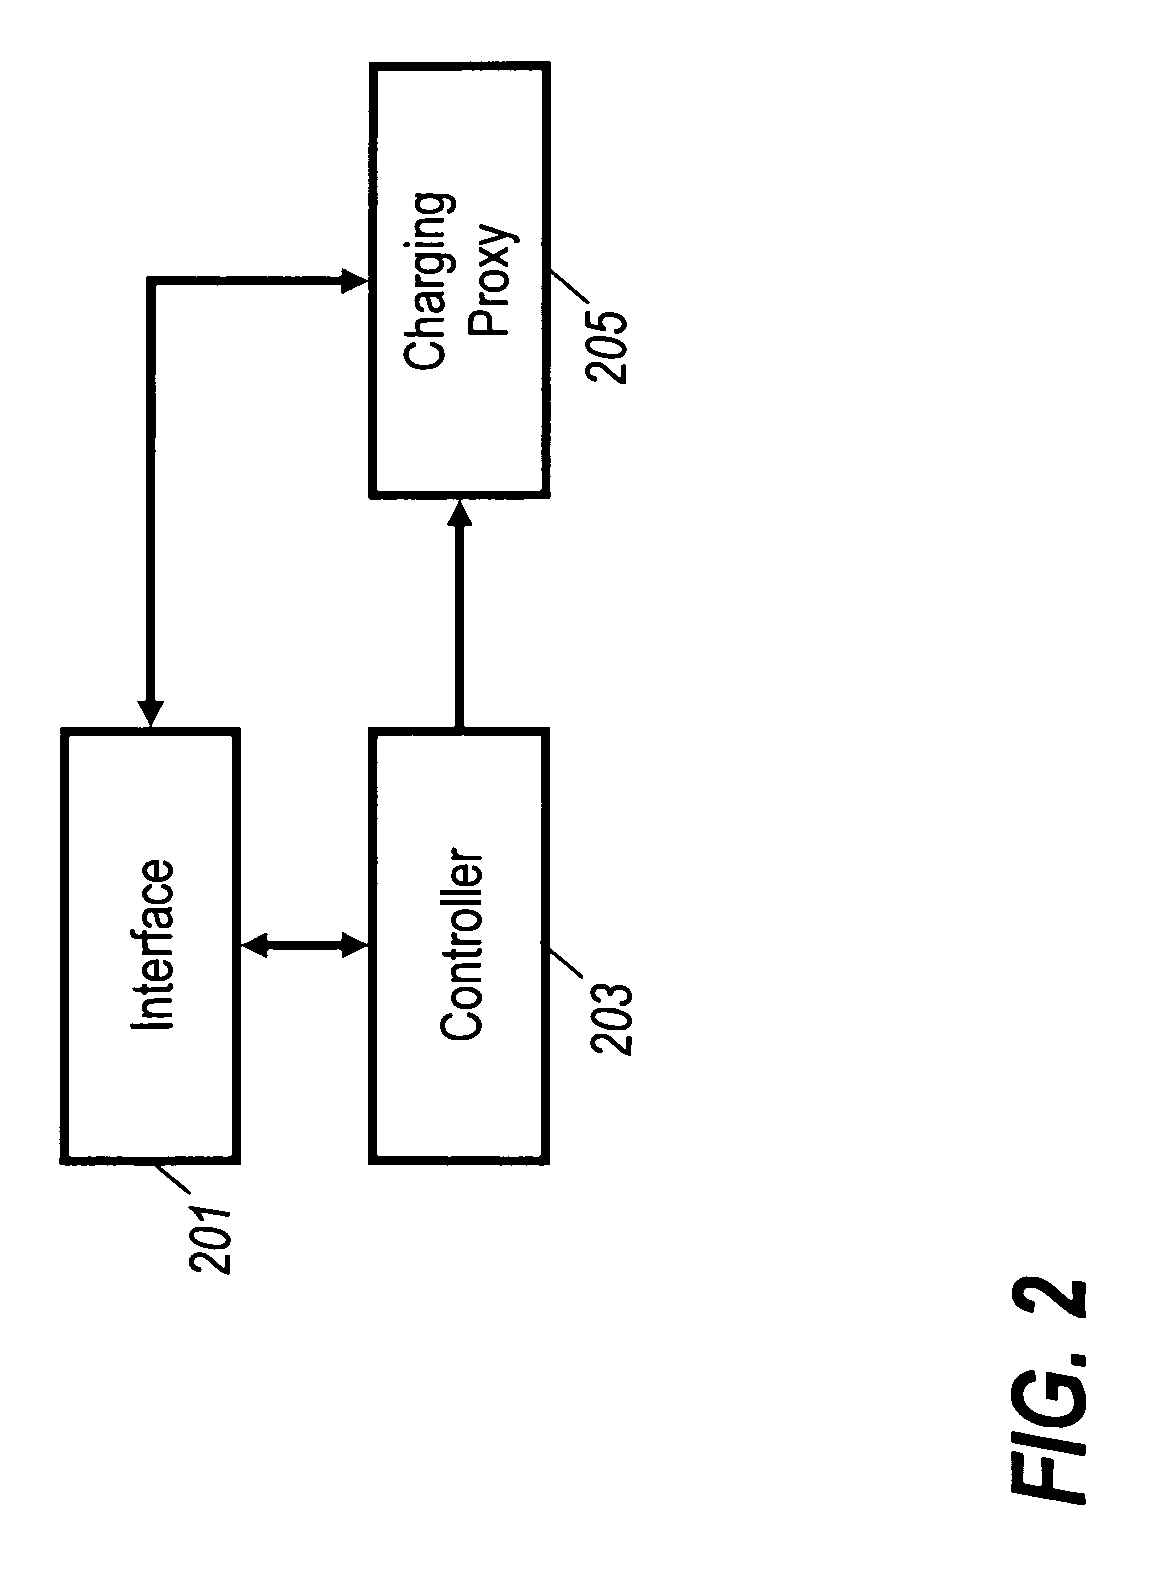 Charging system for a communication system